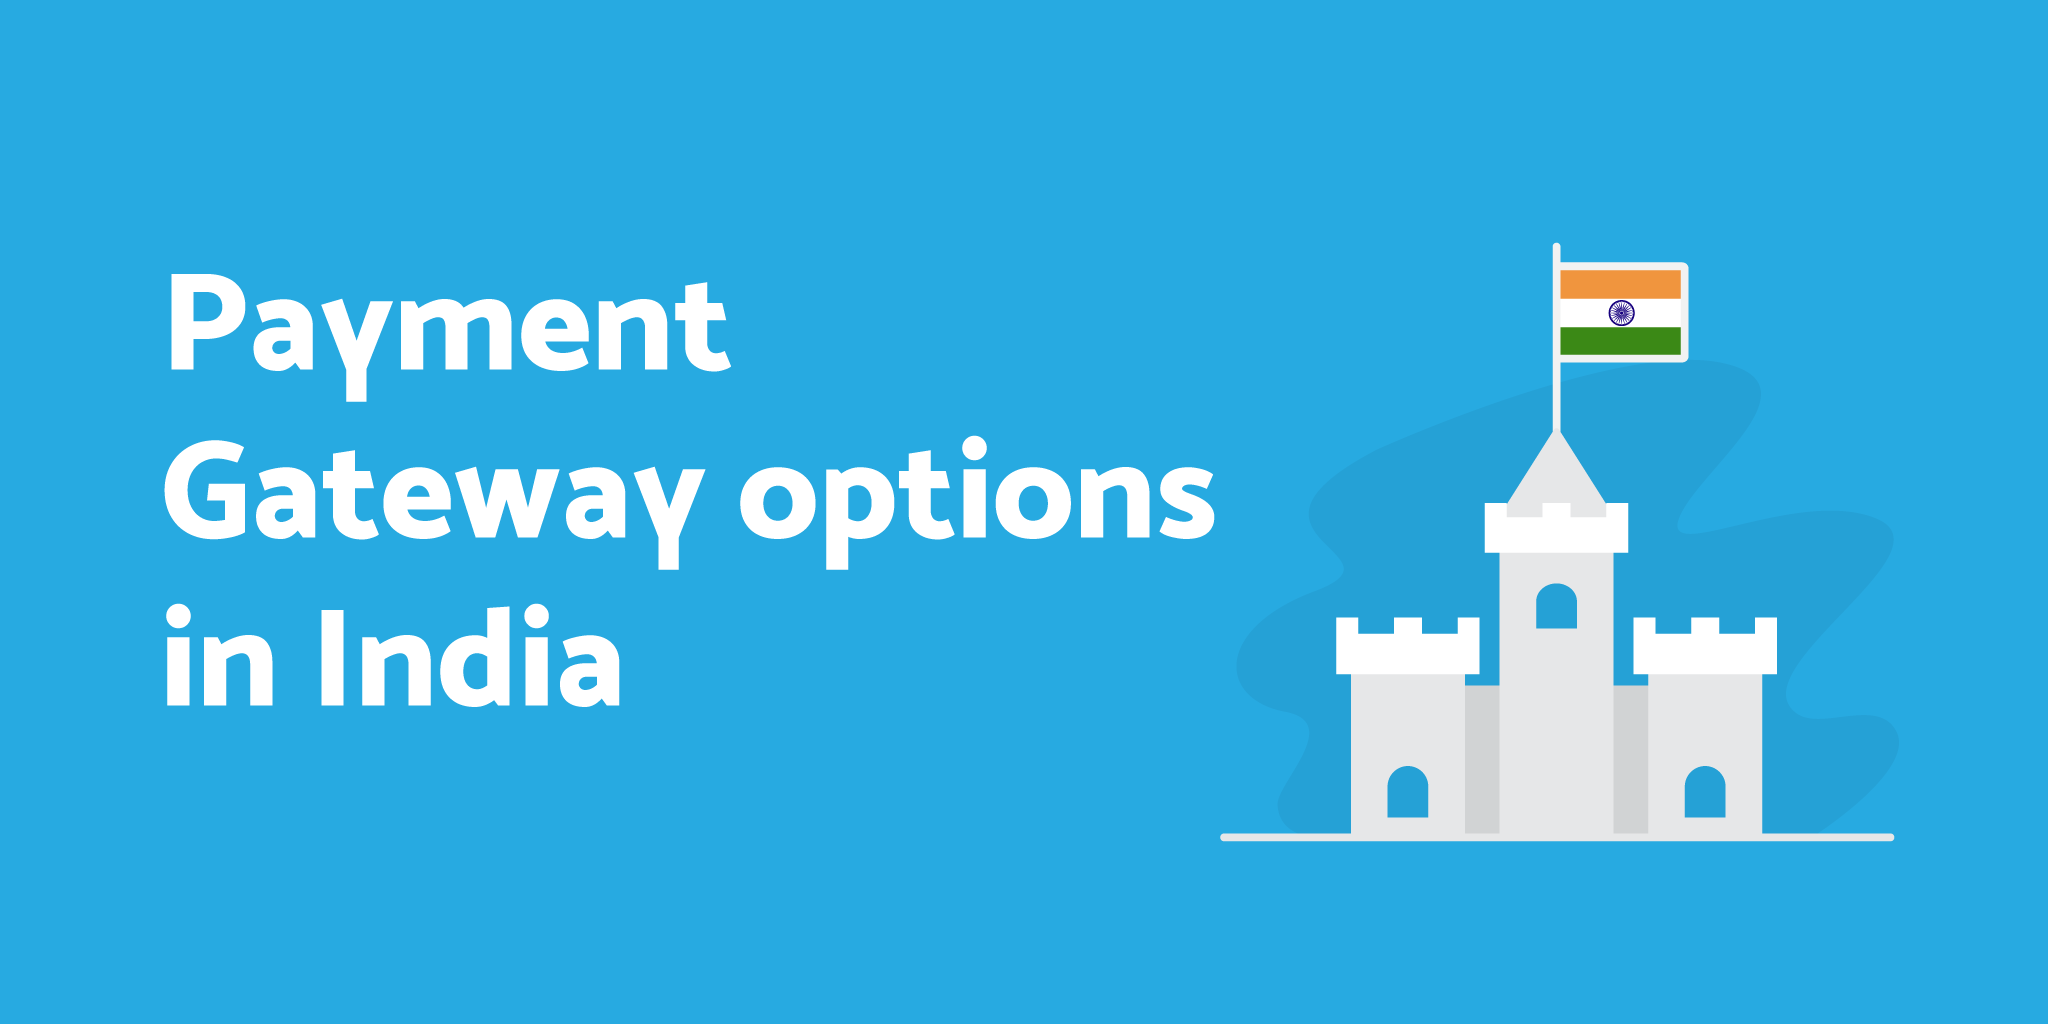 Payment Gateway Options for Indian Businesses - Chargebee's SaaS Dispatch